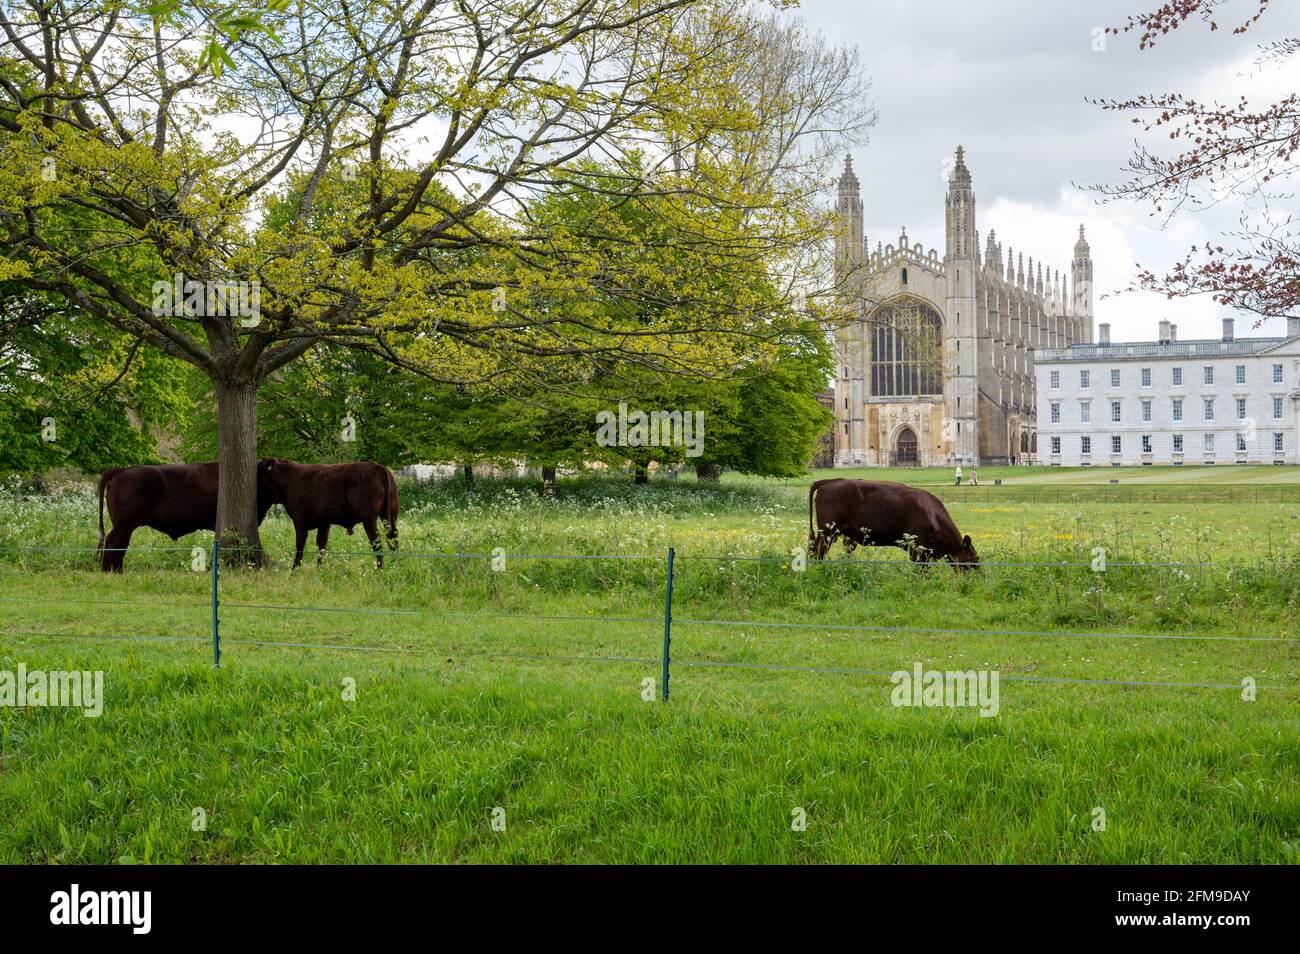 Cambridge, UK. 7th May, 2021. Red poll cattle graze in the lush green fields on The Backs behind Kings College chapel, part of Cambridge University on a mixed day of spring weather with both sun and showers. The UK weather is forecast to become wet and warmer over the weekend. Credit: Julian Eales/Alamy Live News Stock Photo